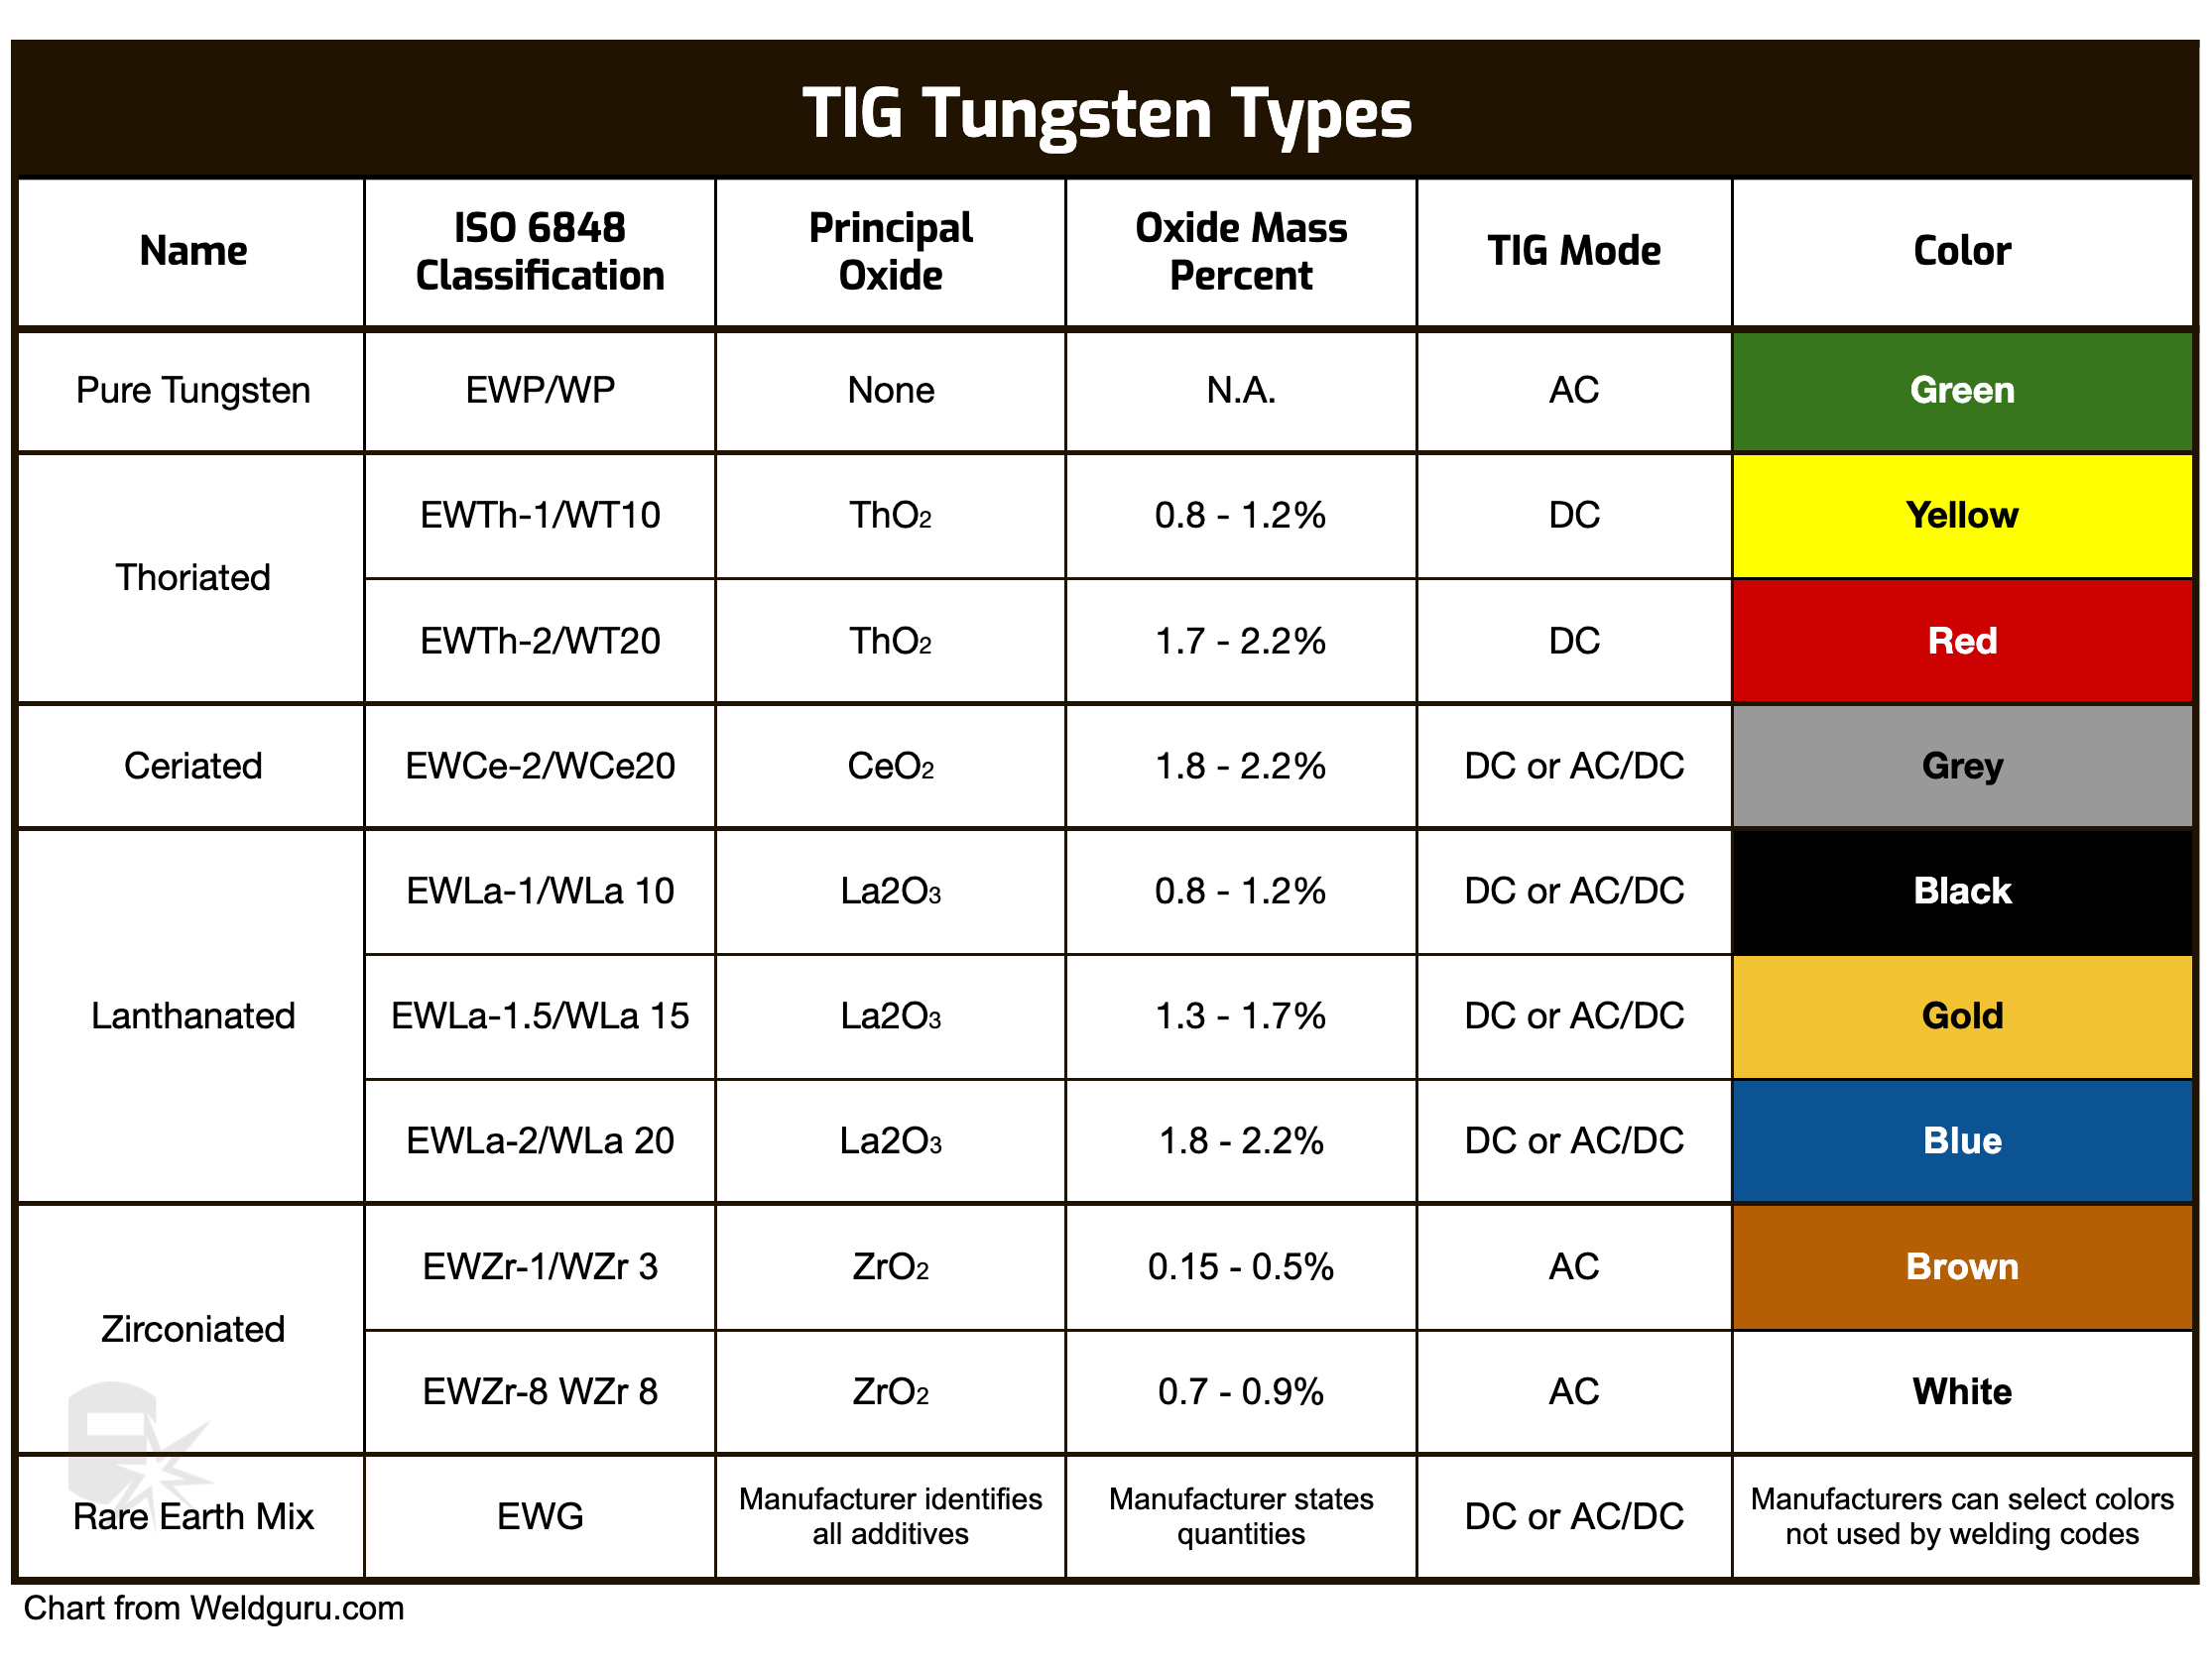 tig tungsten type selection chart